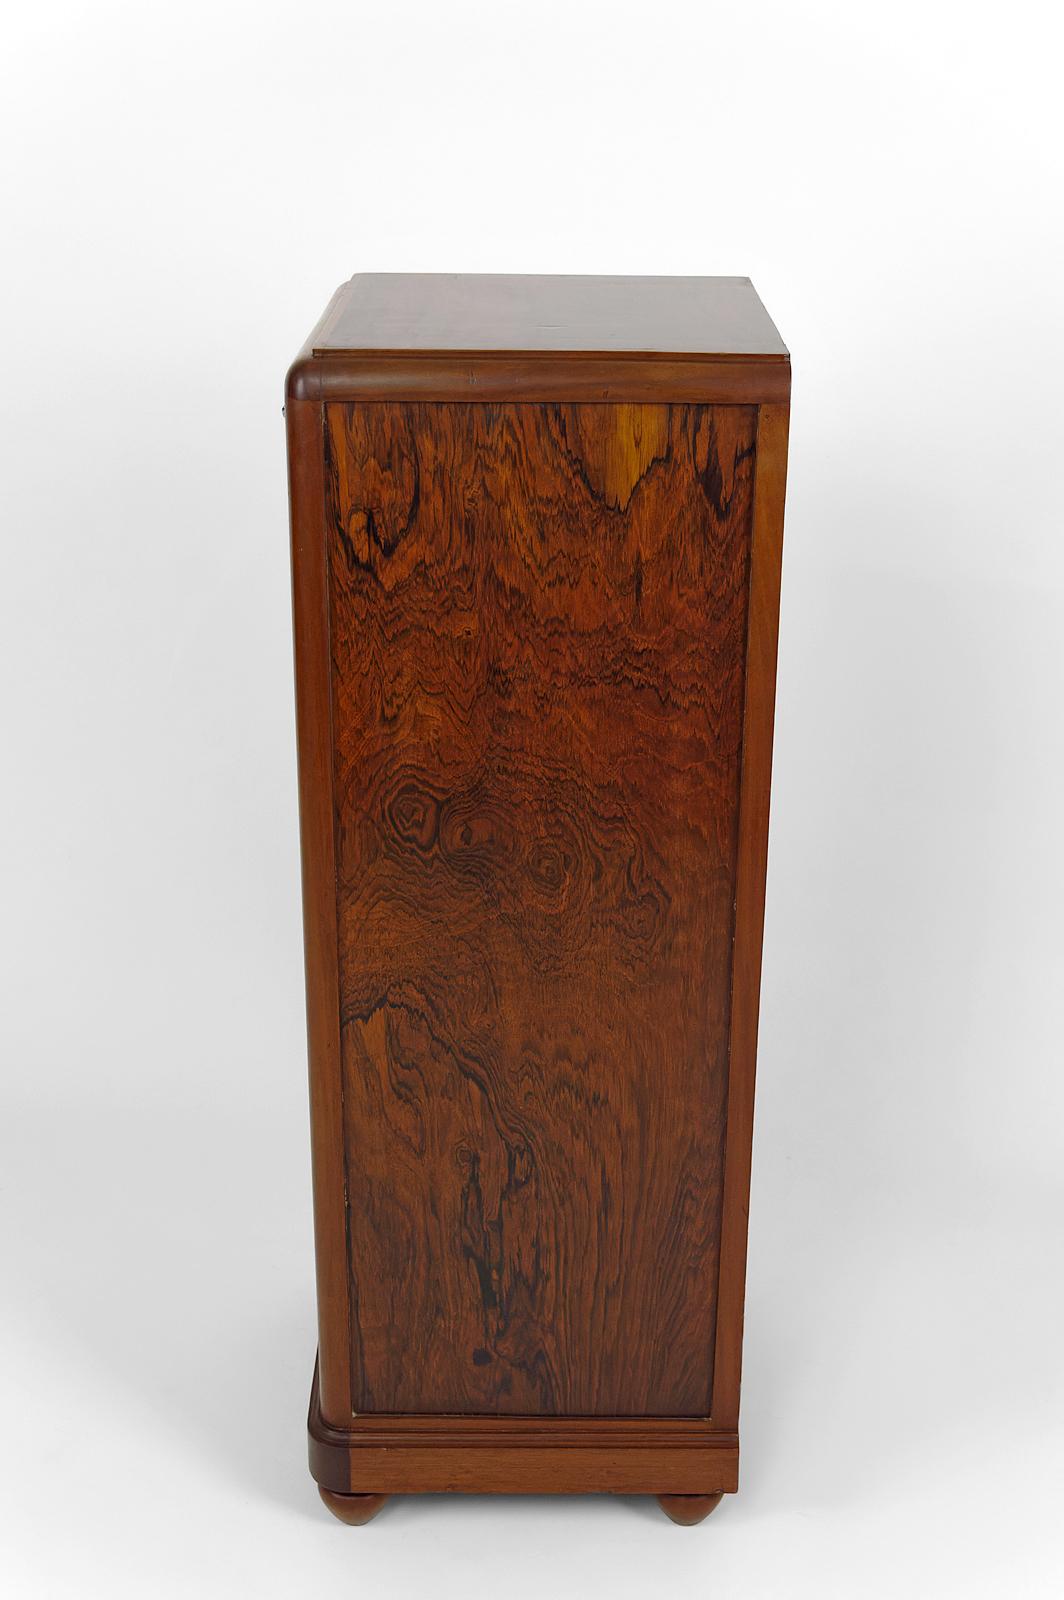 Early 20th Century Art Nouveau Nightstand by Louis Majorelle, circa 1910